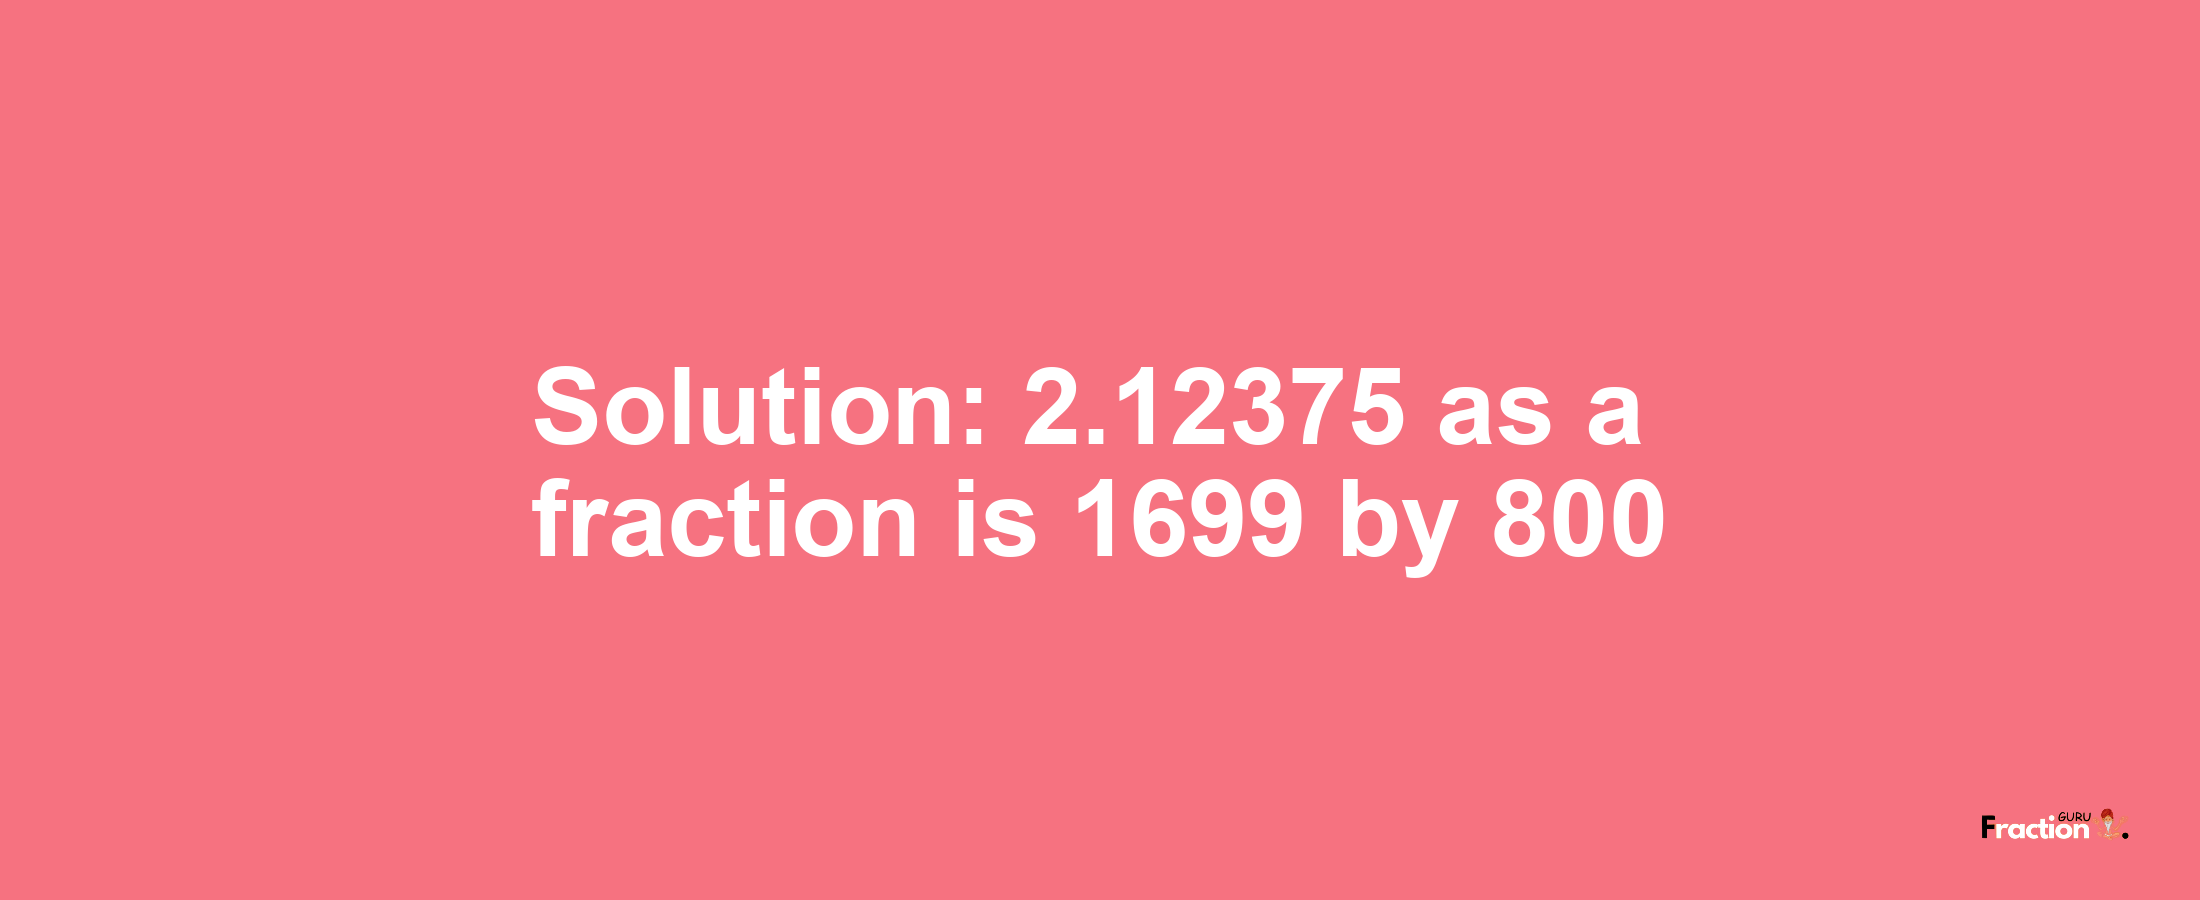 Solution:2.12375 as a fraction is 1699/800